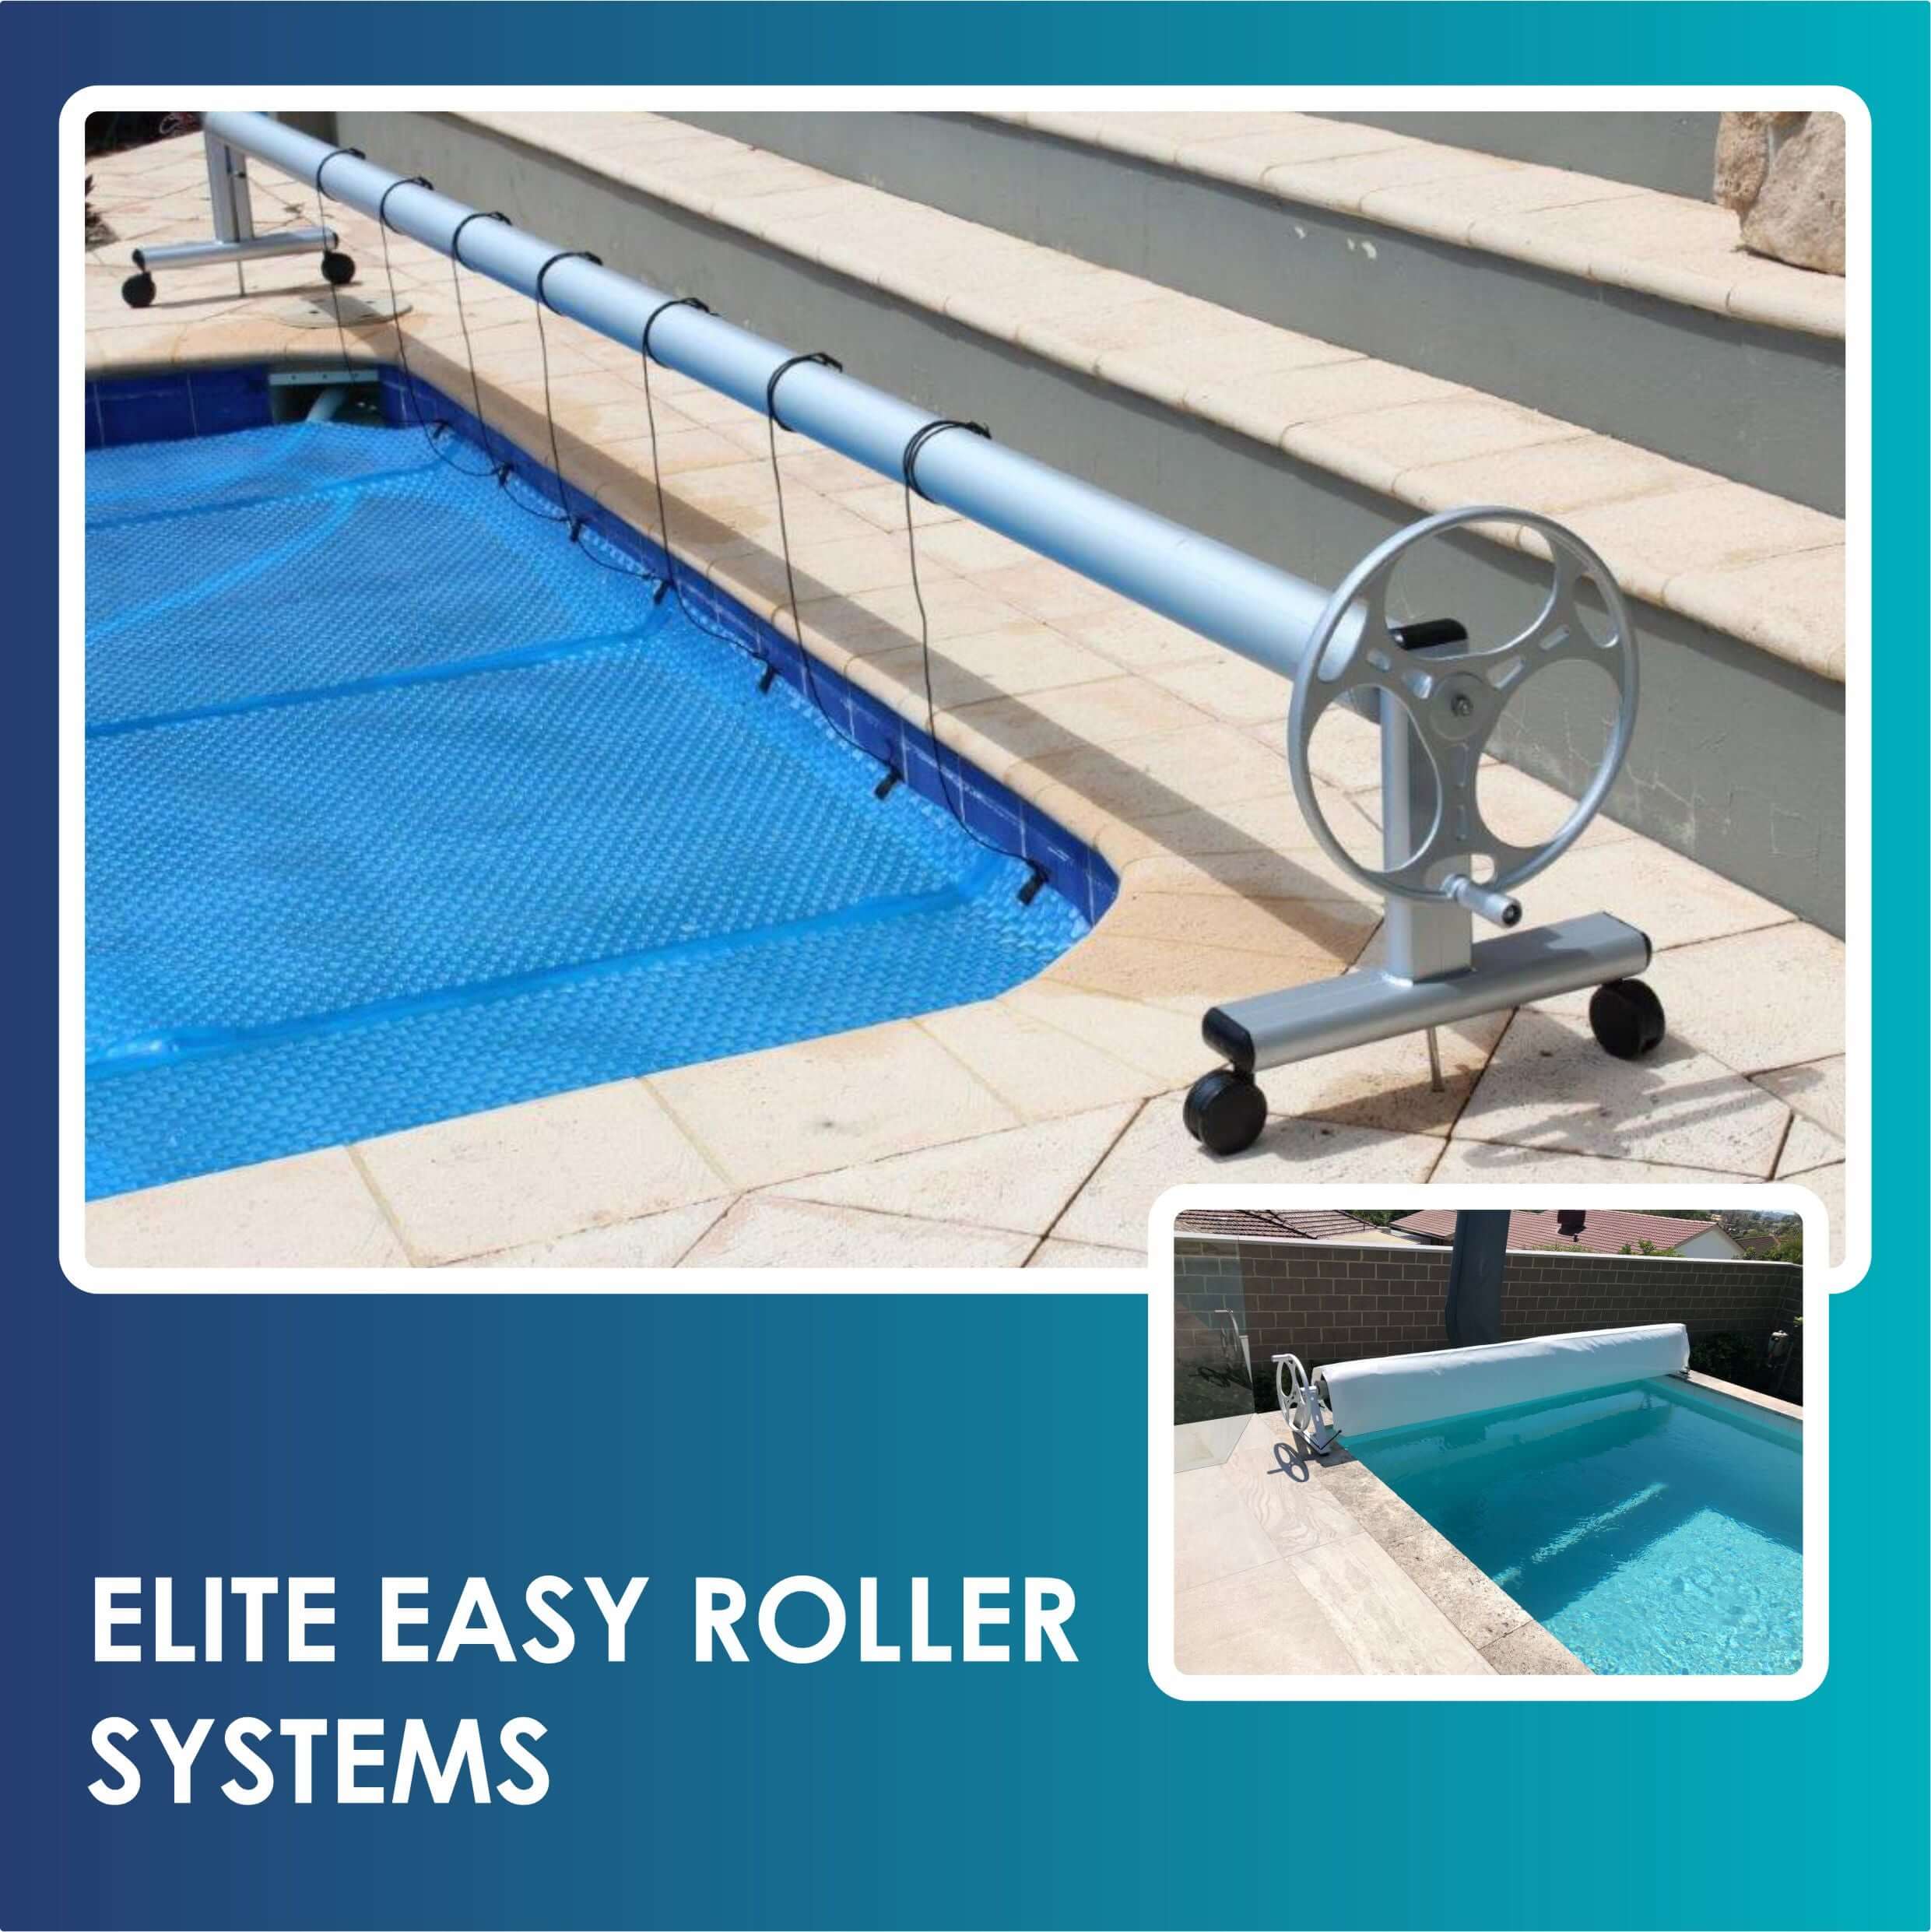 EASY ROLLERS COLLECTION IMAGE.jpg